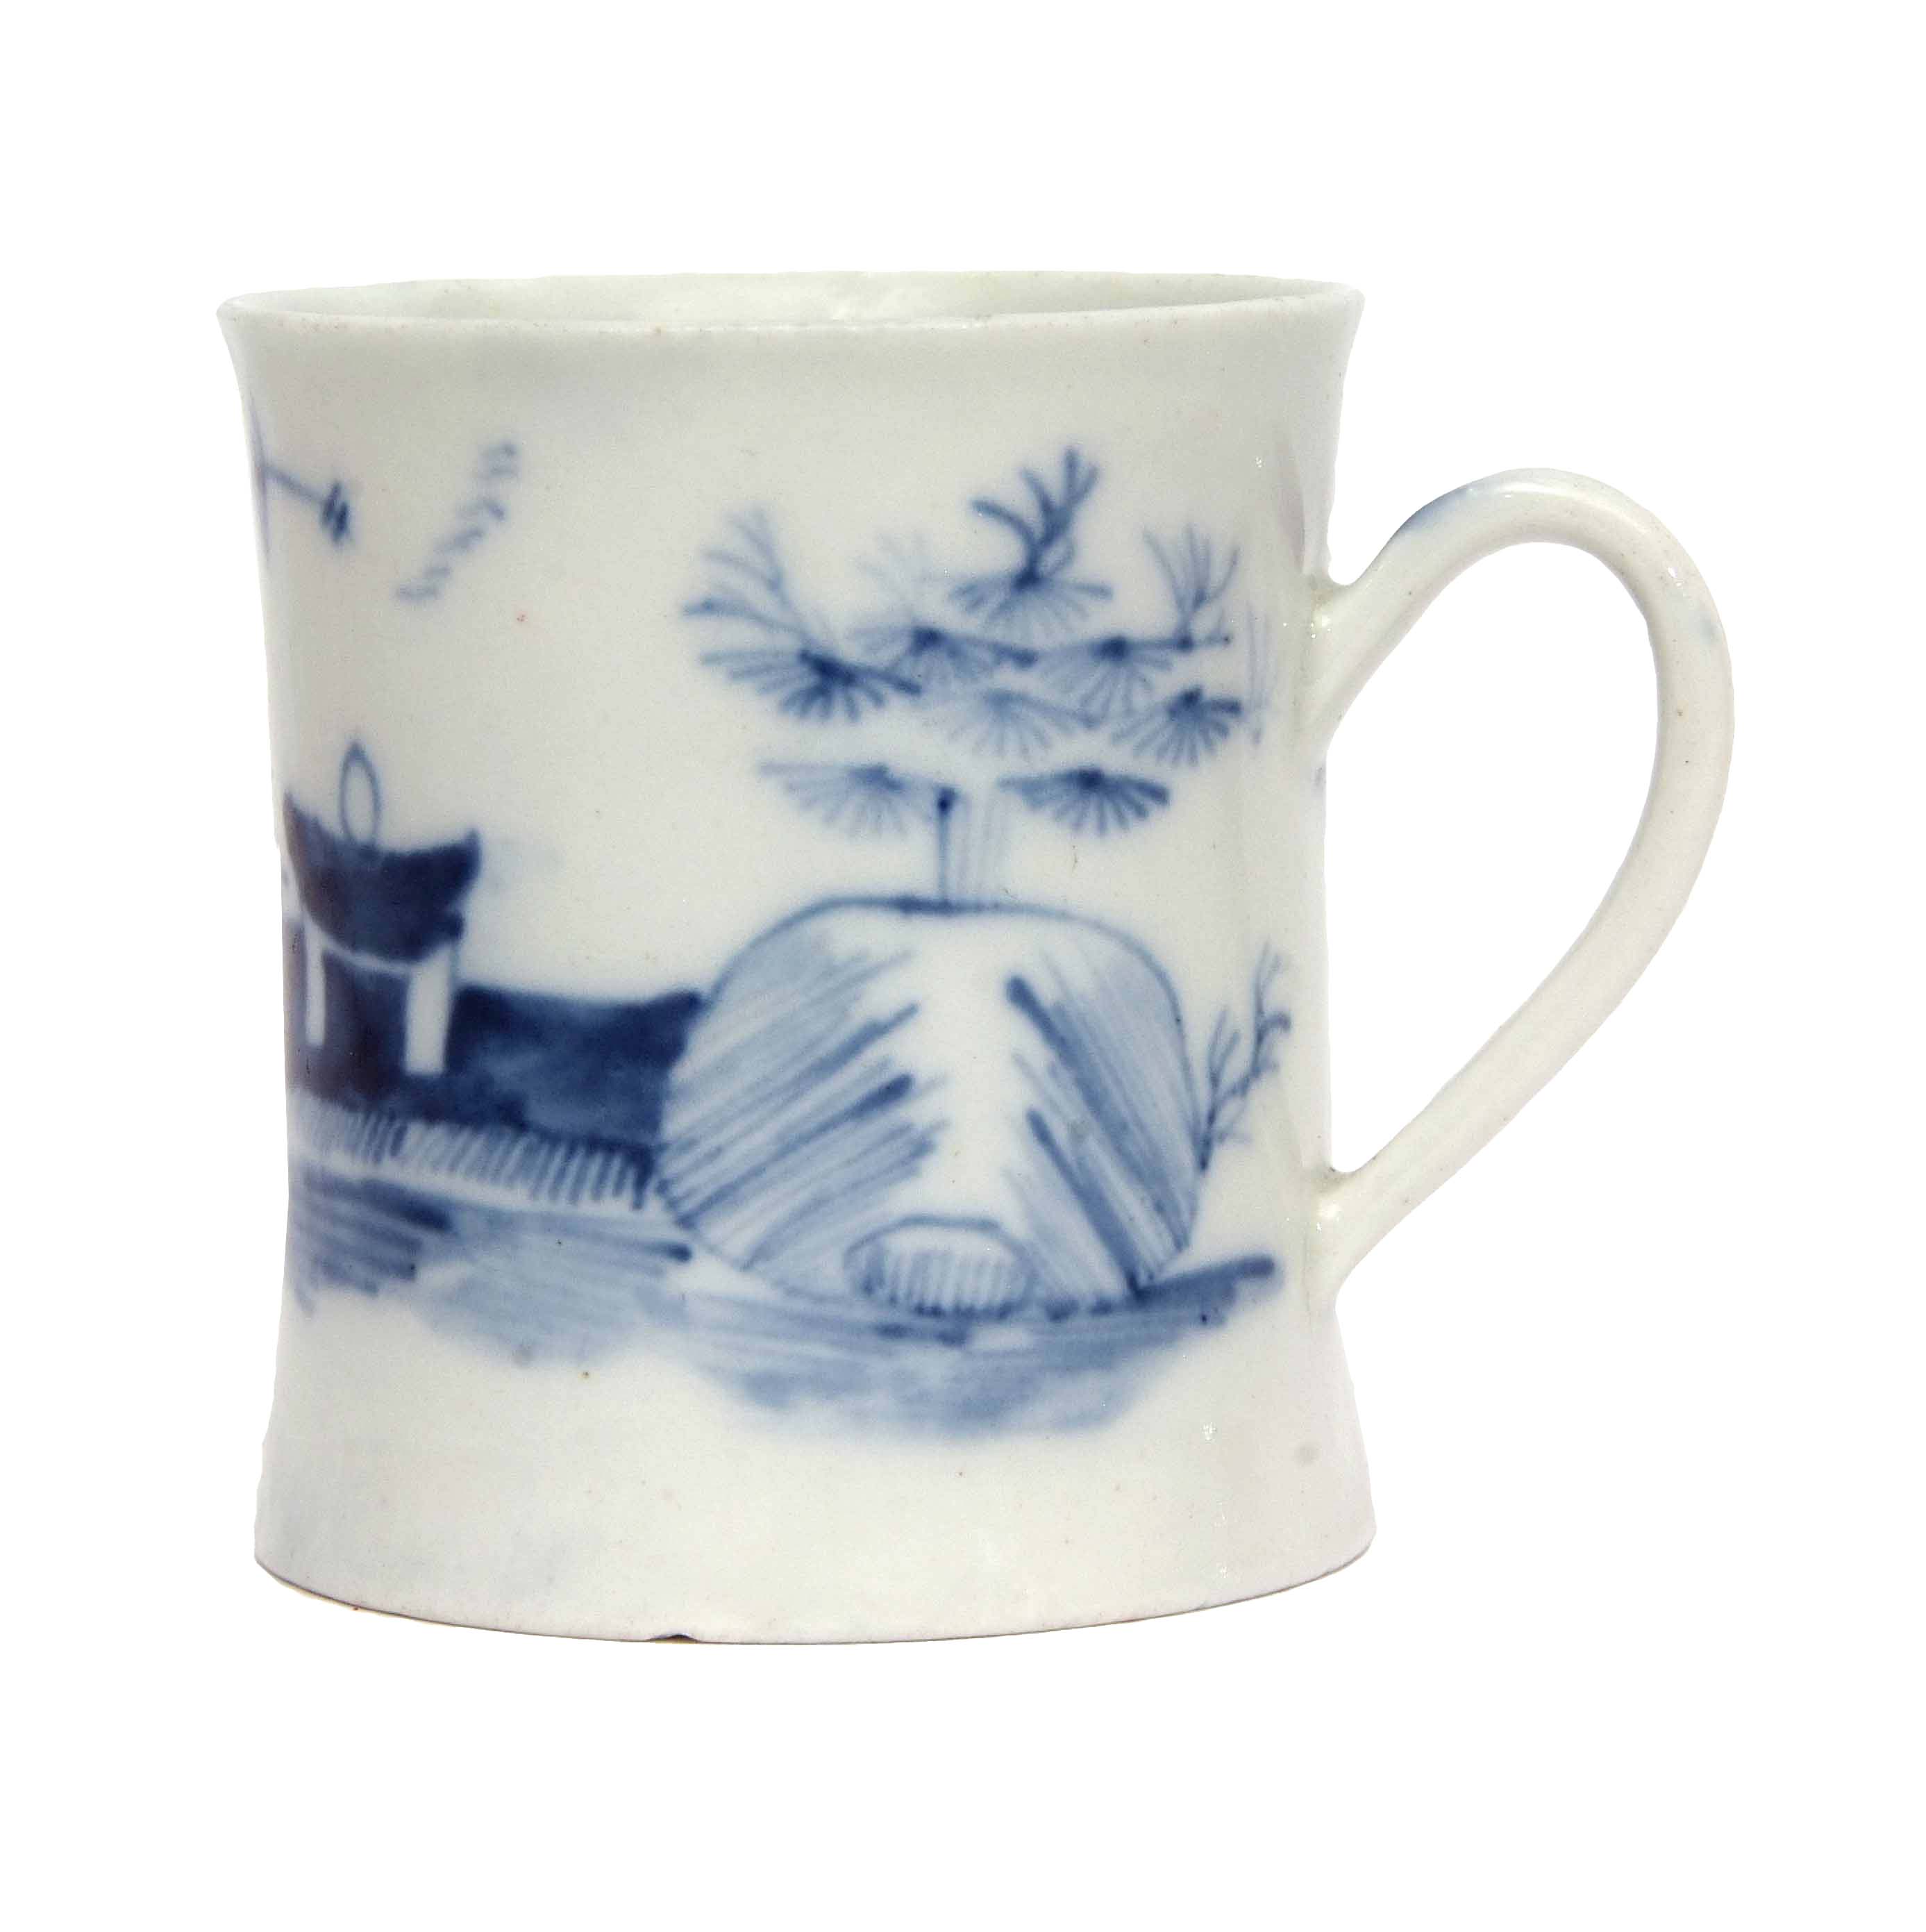 18th century Worcester coffee can or small mug circa 1755, decorated in tones of underglaze blue